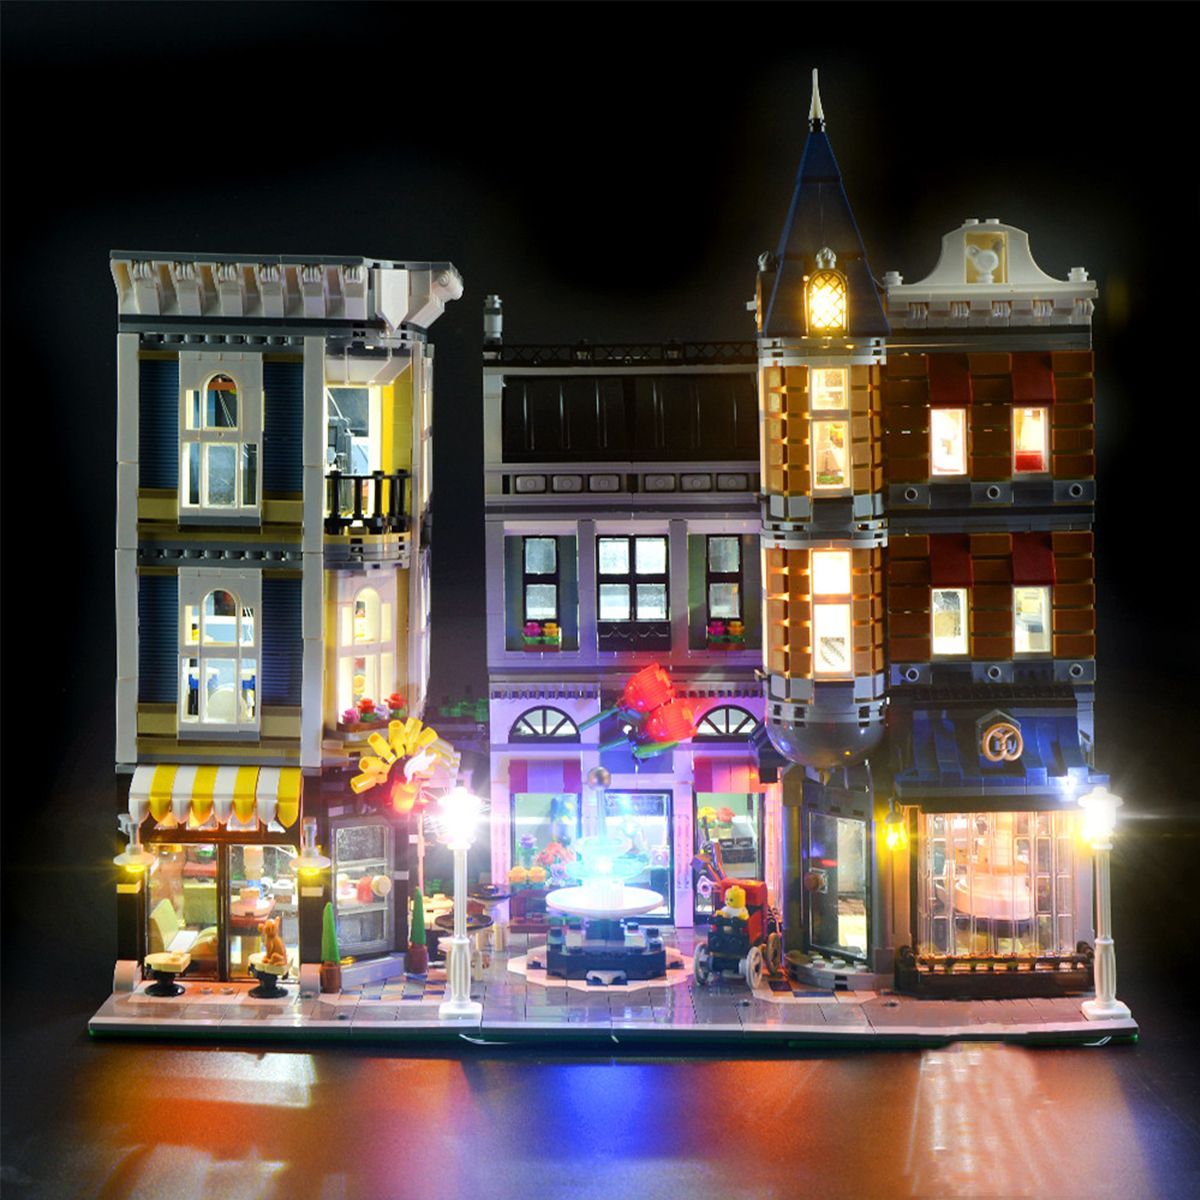 Decorations-Lighting-Kit-Lamp-ONLY-For-Lego-10255-Assembly-Square-Street-Bricks-Buildings-Toys-1460255